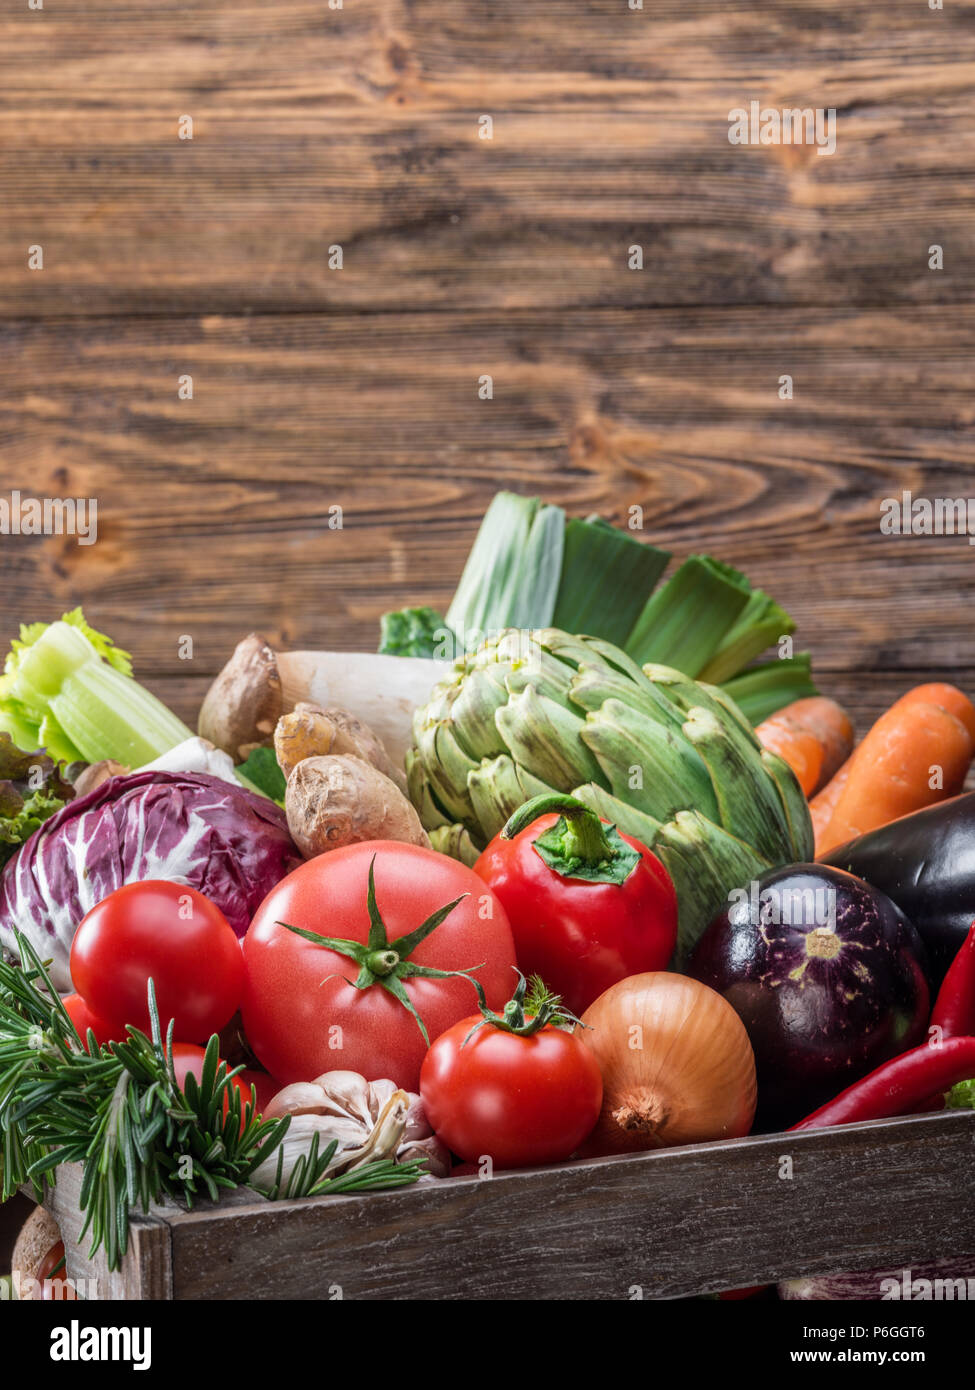 Fresh multi-colored vegetables in wooden crate. Wooden background. Stock Photo